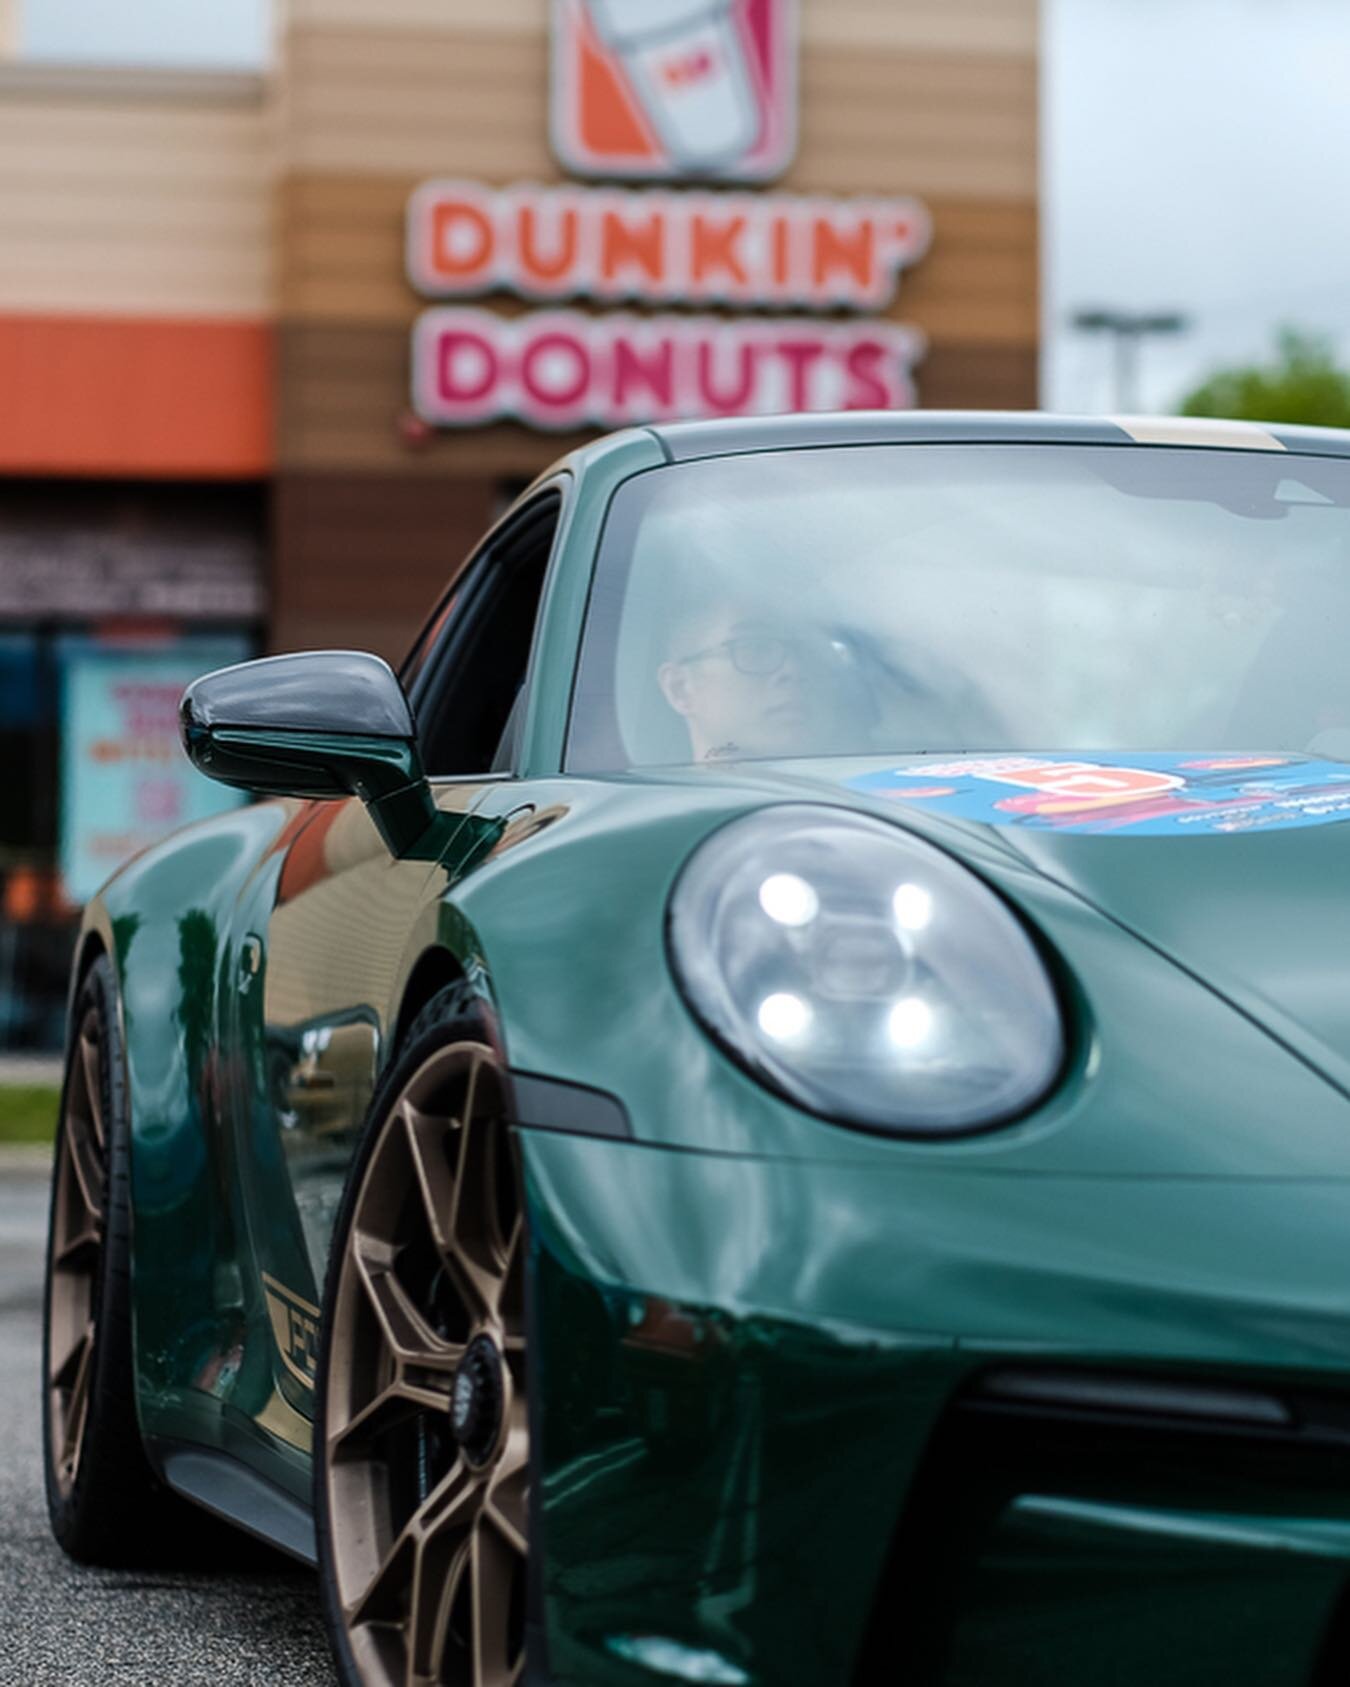 We&rsquo;re one week away from our third annual Dunkin&rsquo; Drives on May 6! Participating stores and suggested routes are at carparknyc.com. We have 7AM start points at @paddocknyc&rsquo;s new 550 W. 45th St. garage and @sundaymotorcocafe in NJ. W